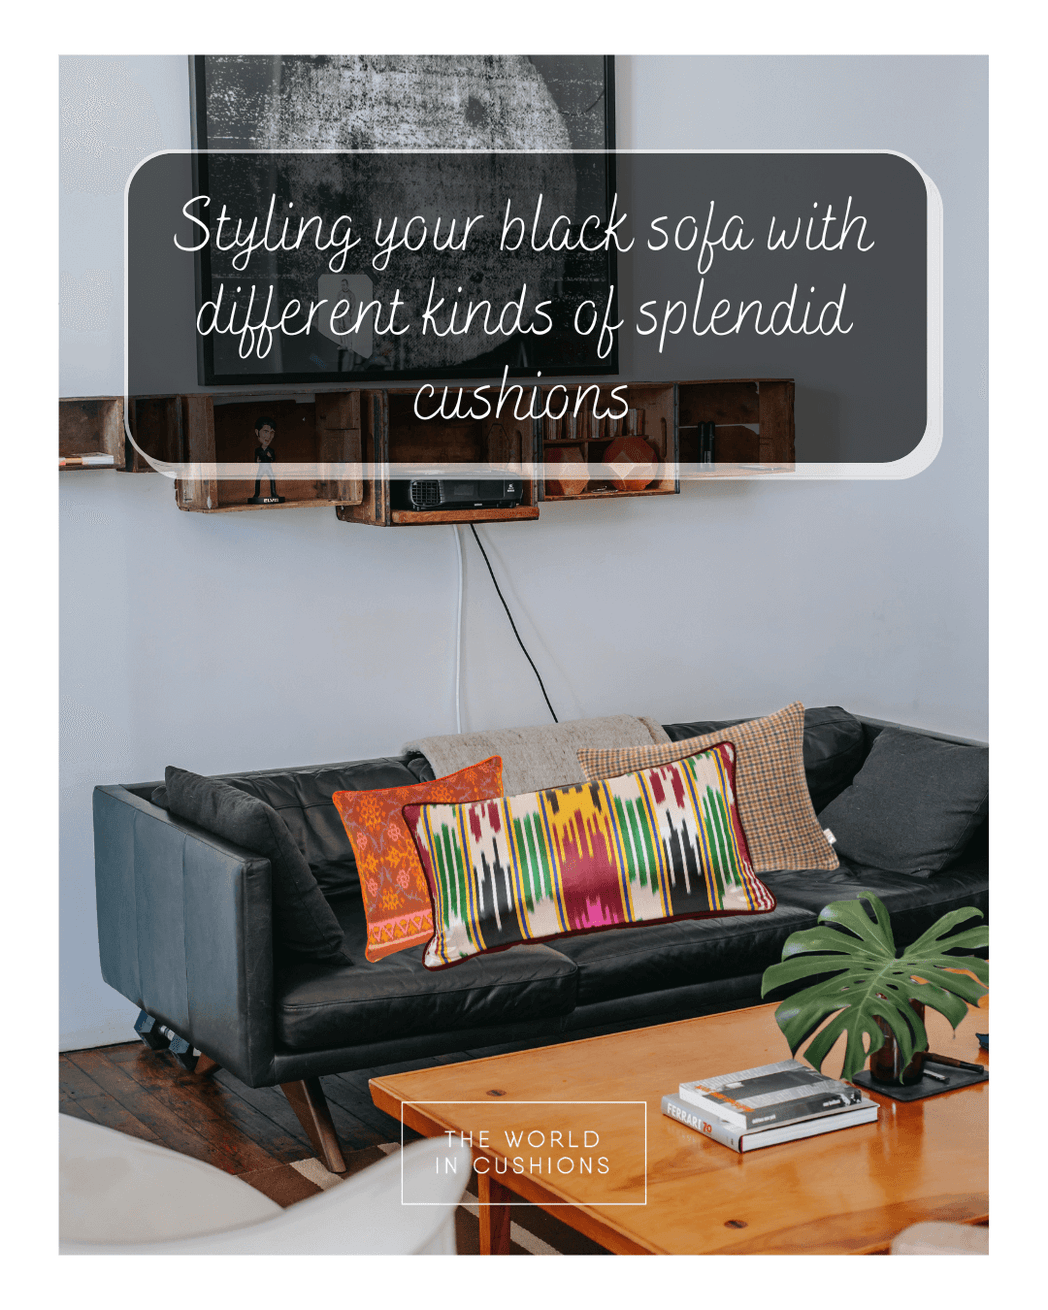 Styling your black sofa with different kinds of splendid cushions